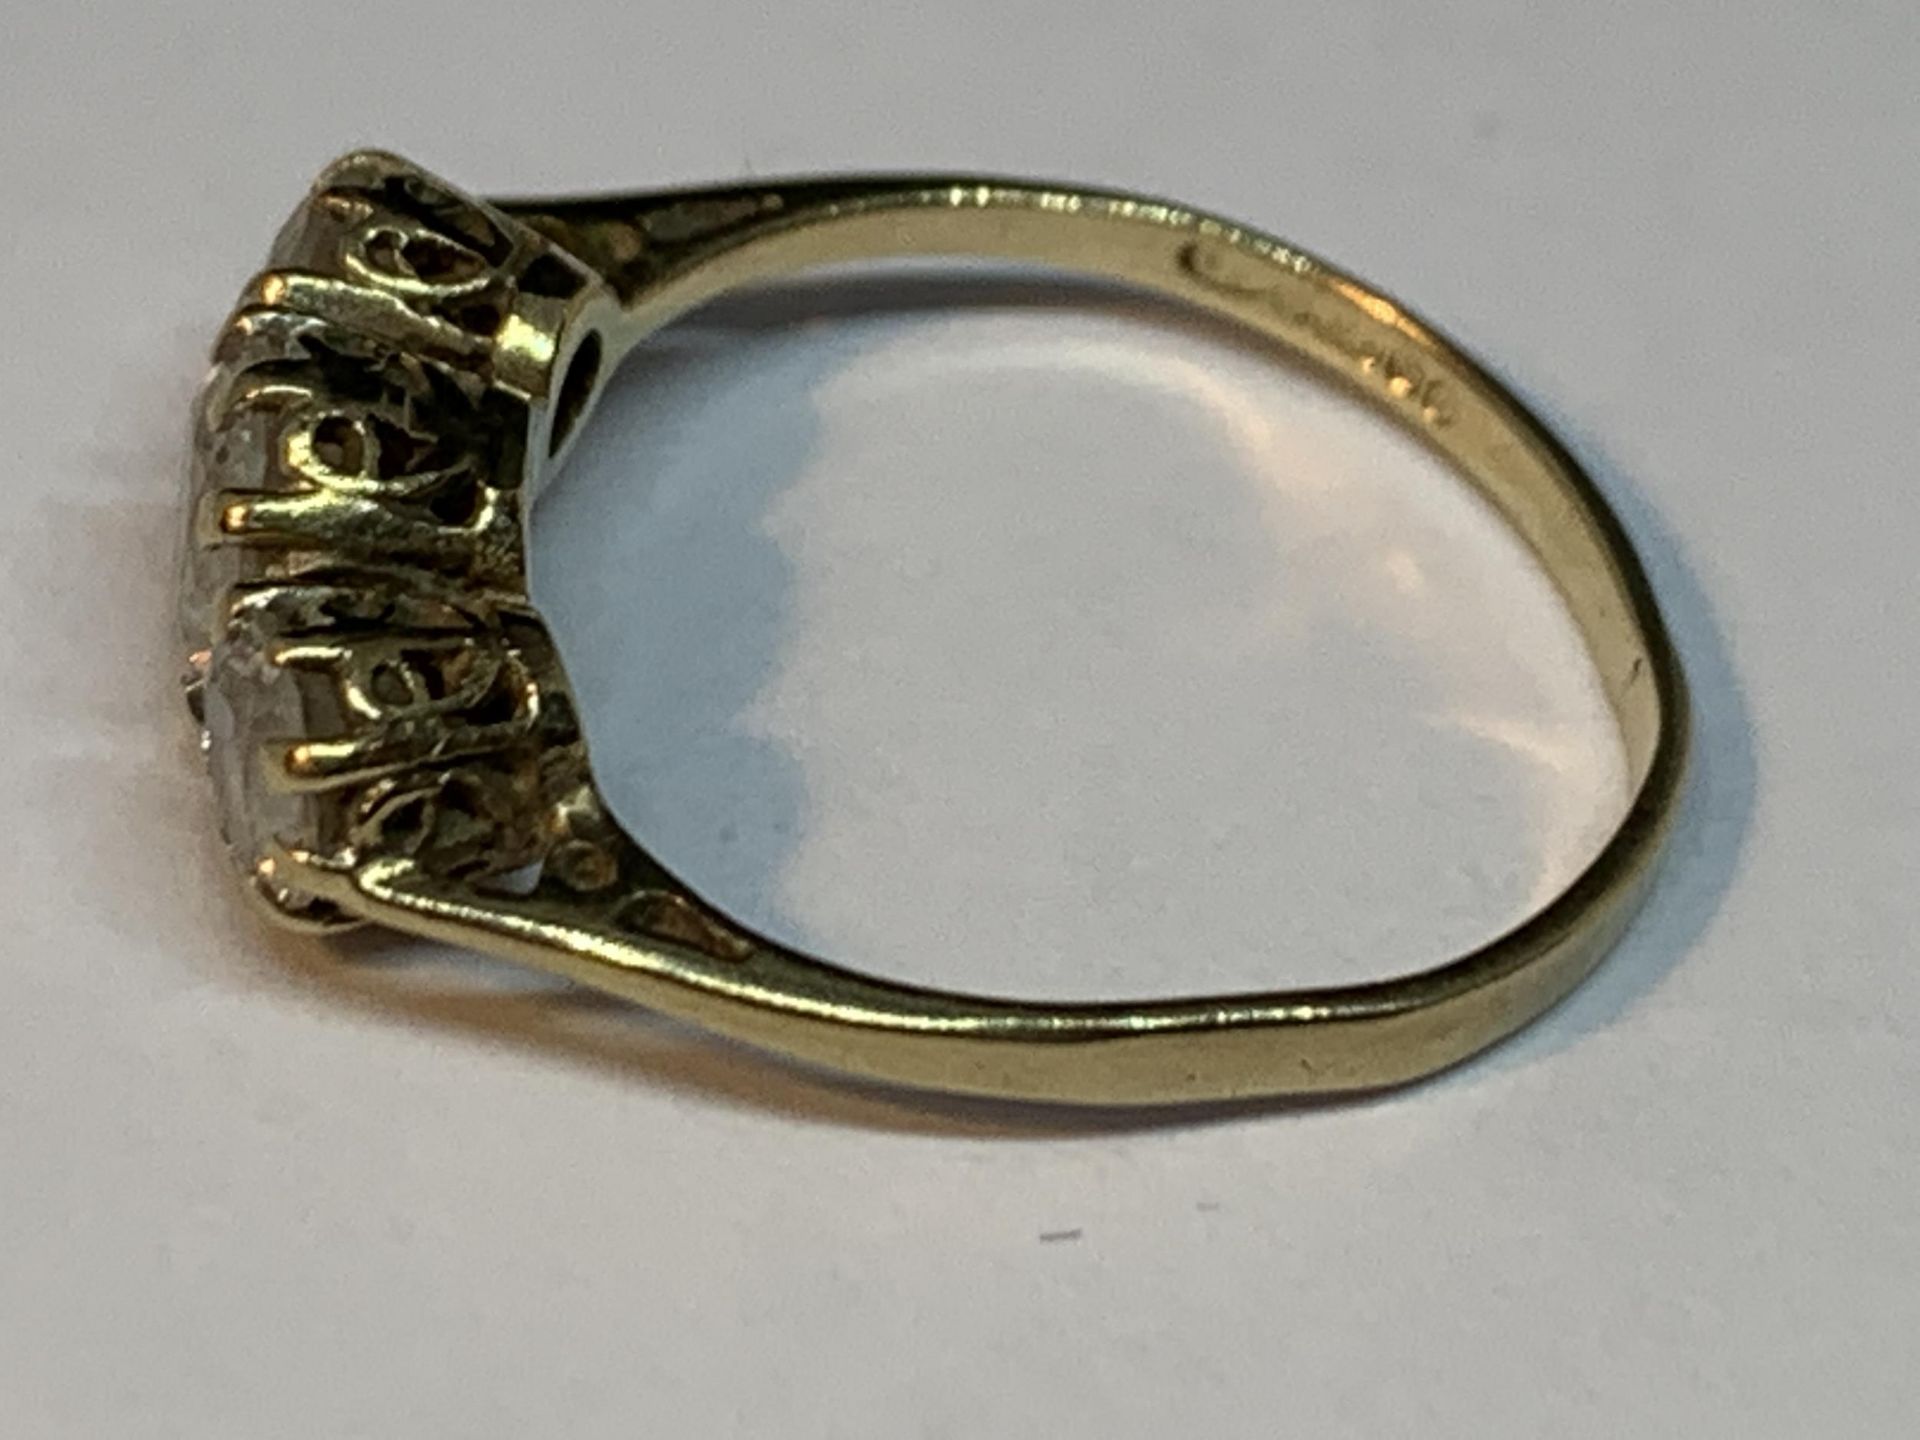 A 9 CARAT GOLD RING WITH THREE IN LINE CUBIC ZIRCONIAS SIZE J/K - Image 2 of 3